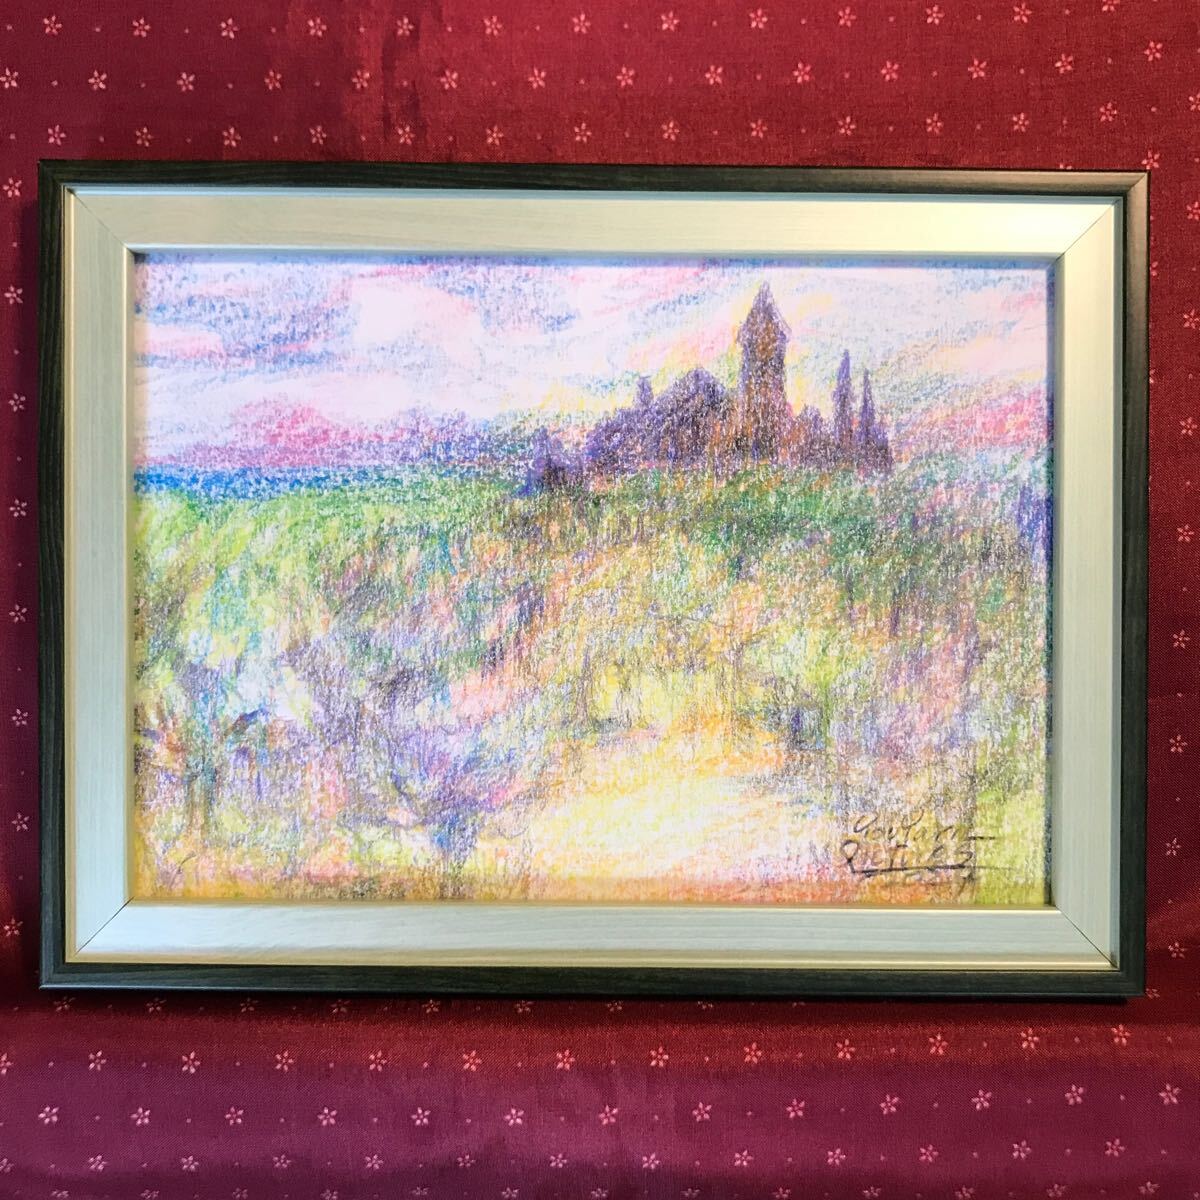 [Framed item] Dreaming far away ■It may become a treasure in the future! ■Yuya Matsuzaki ■Graduated painter from Tokyo University of the Arts ■Original original painting by Shinsaku■Artist with an incurable disease, artwork, painting, others